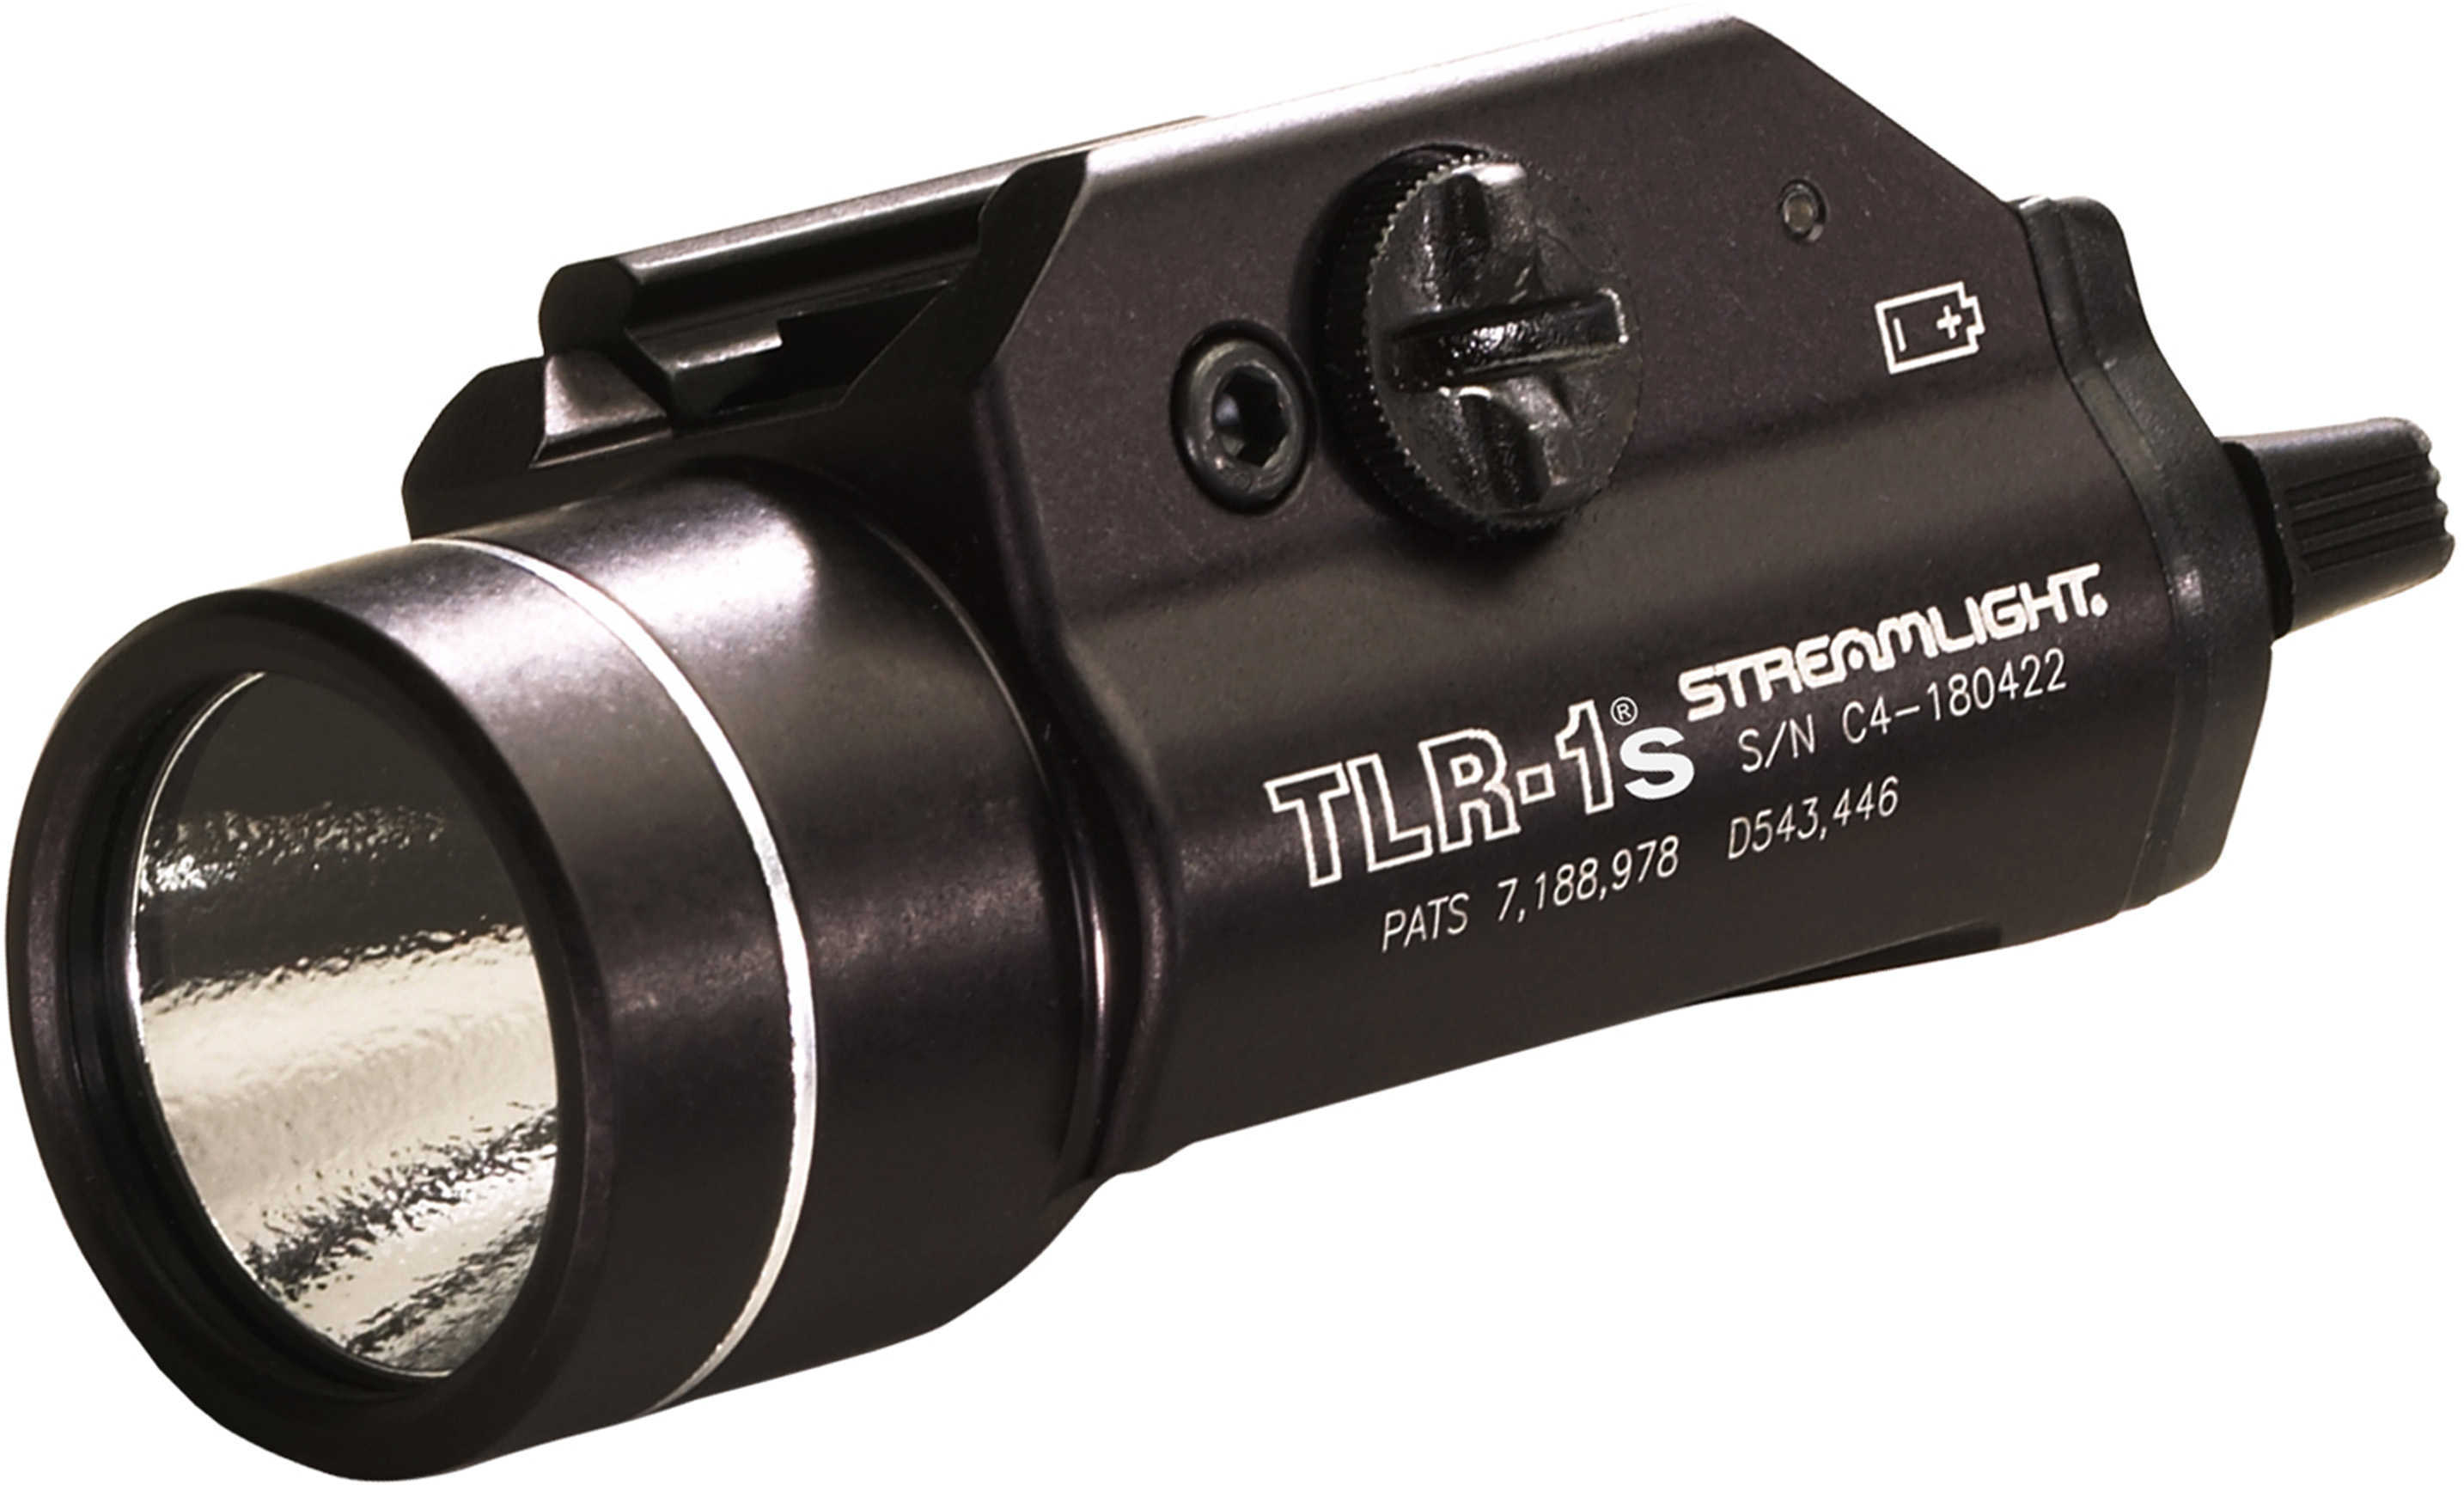 Streamlight TLR-1s Tactical Light C4 LED 300 Lumens with Strobe Black Finish Batteries 69210